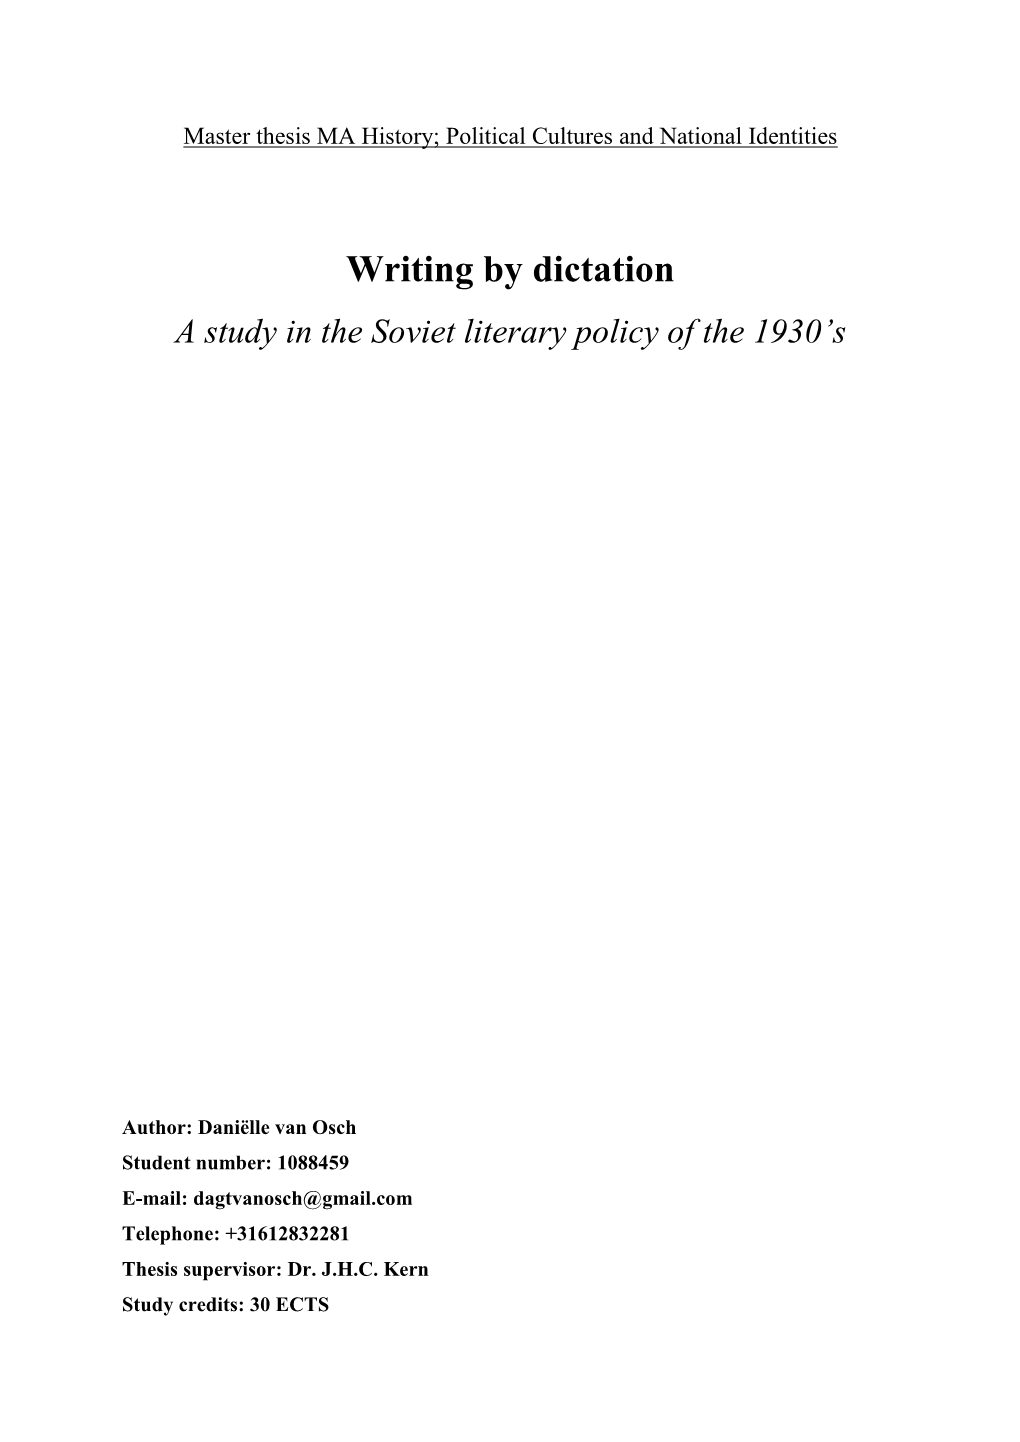 Writing by Dictation a Study in the Soviet Literary Policy of the 1930’S